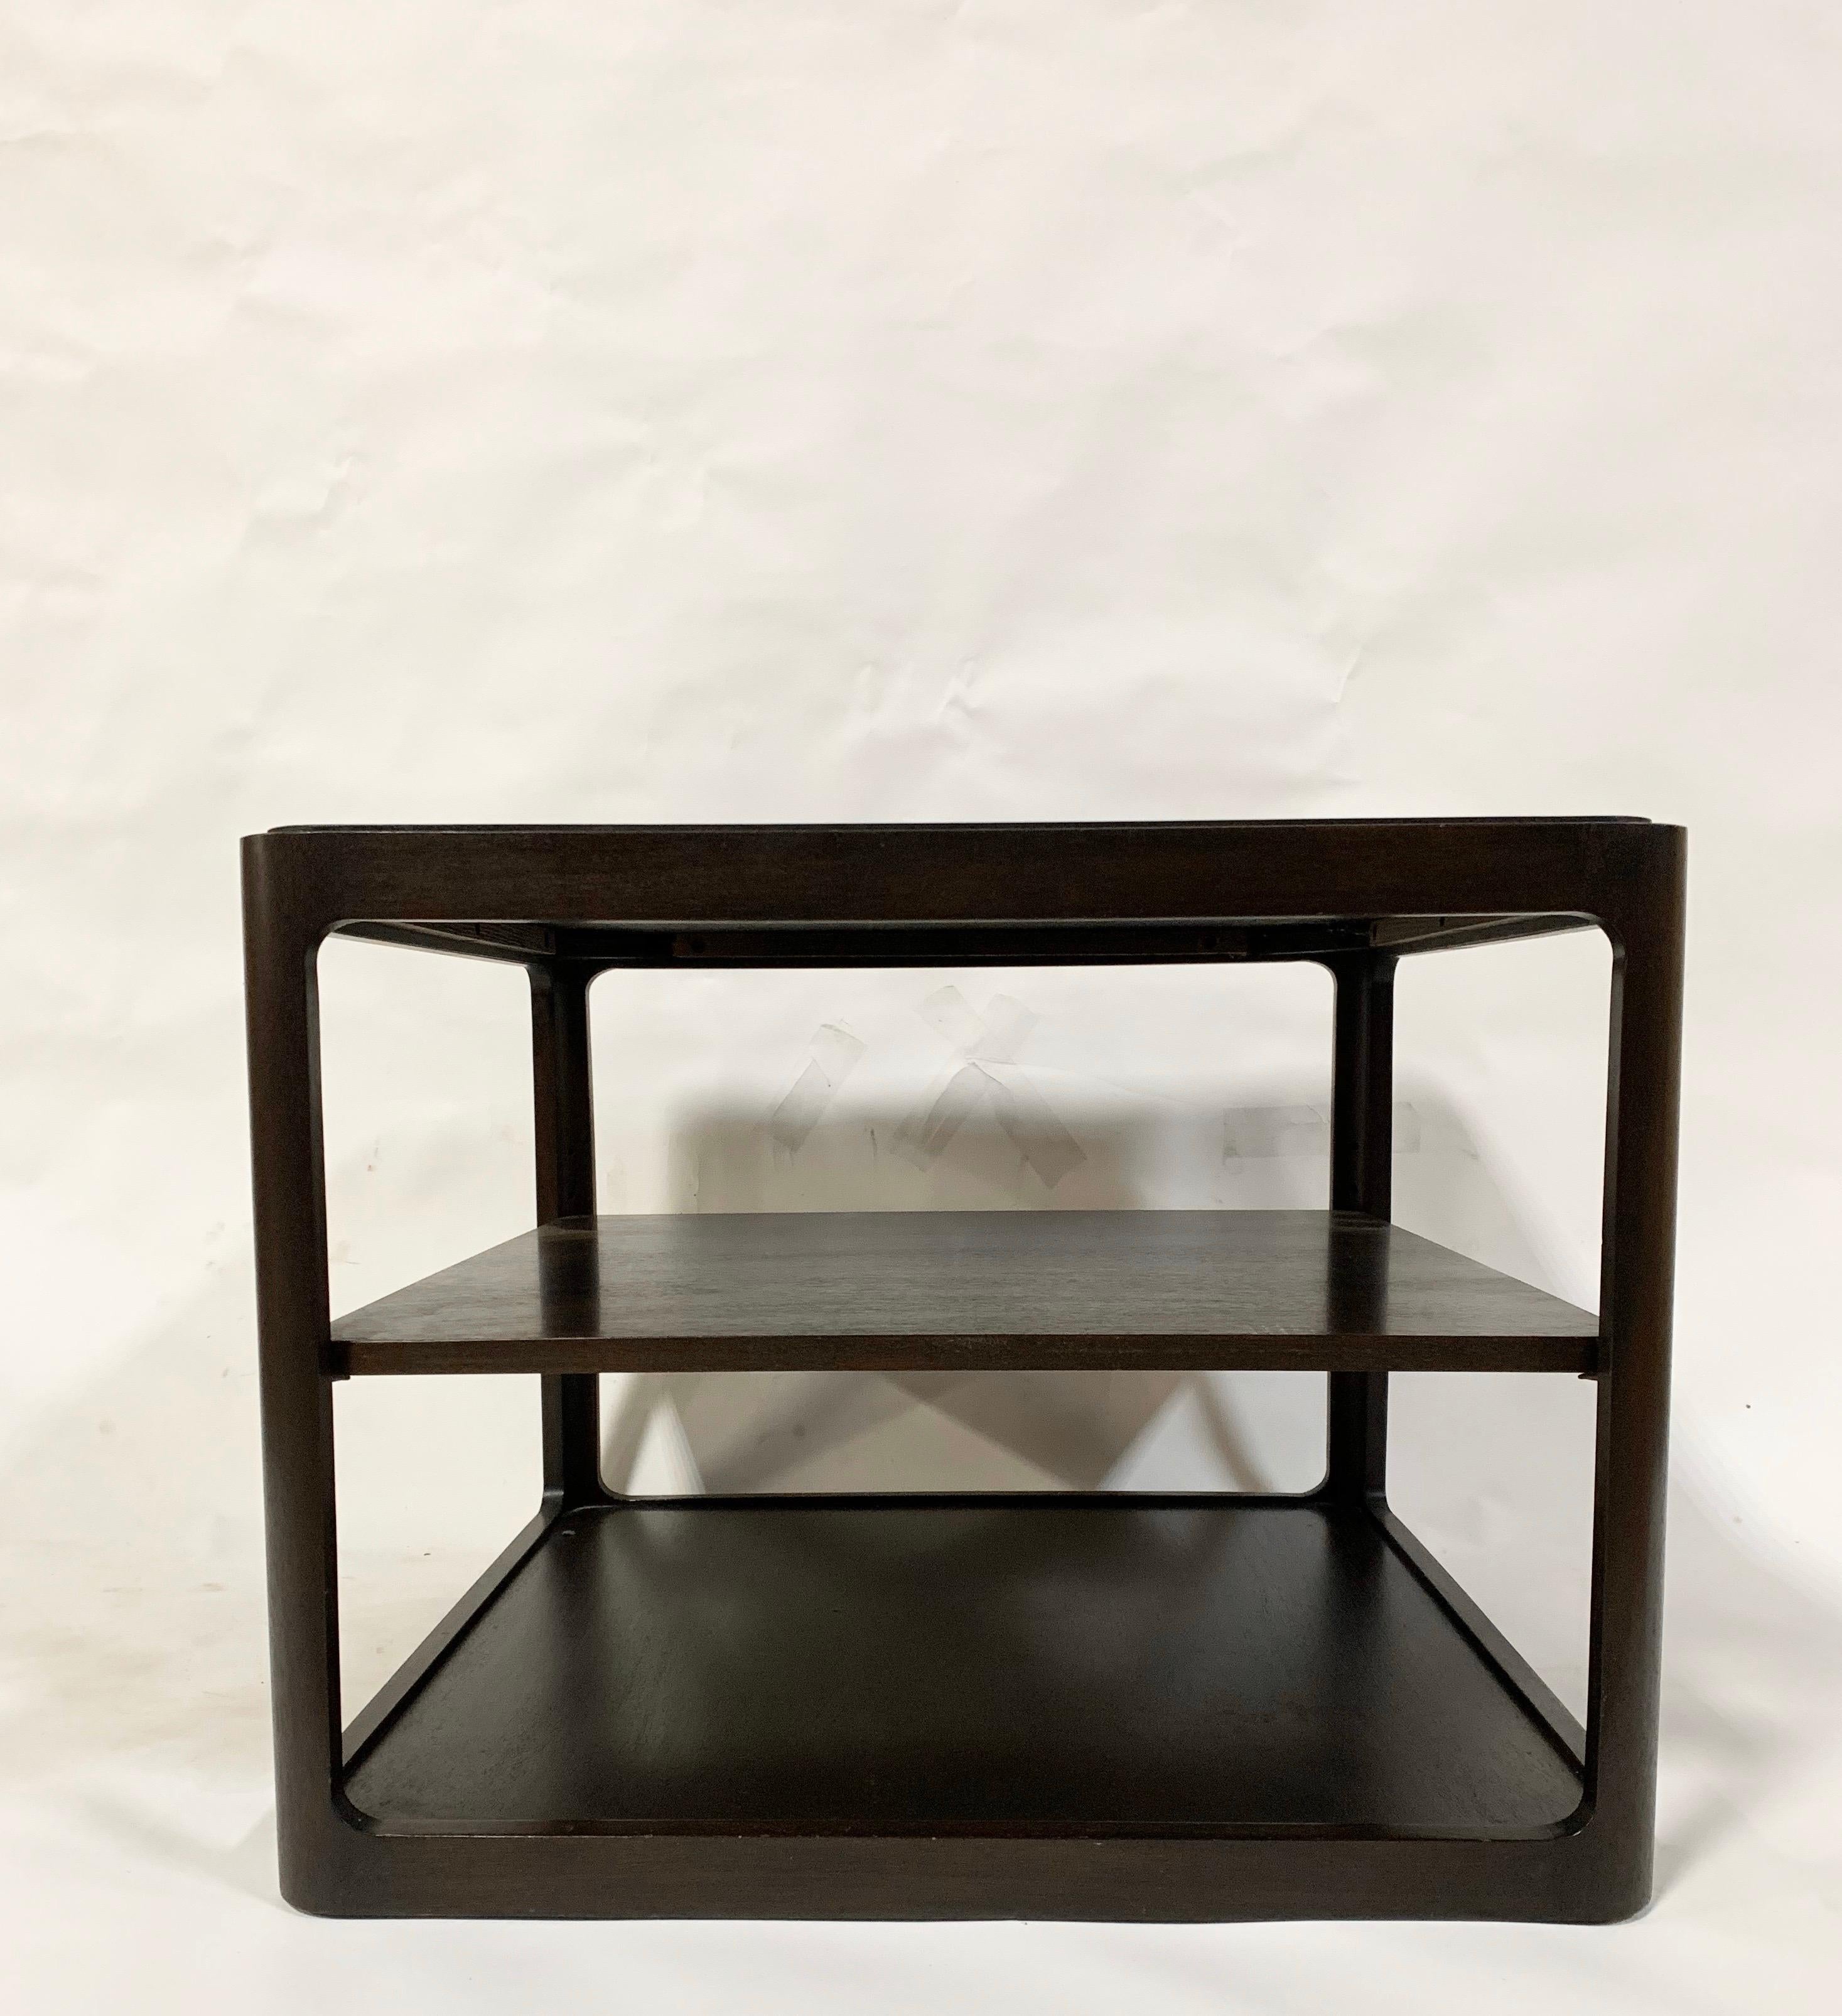 A square top end table with adjustable middle shelf. By Edward Wormley for Dunbar. USA, 1975. Signed/dated with metal Dunbar tag and paper label to underside.

Beautiful original espresso / dark chocolate brown satin-finished mahogany.

Price